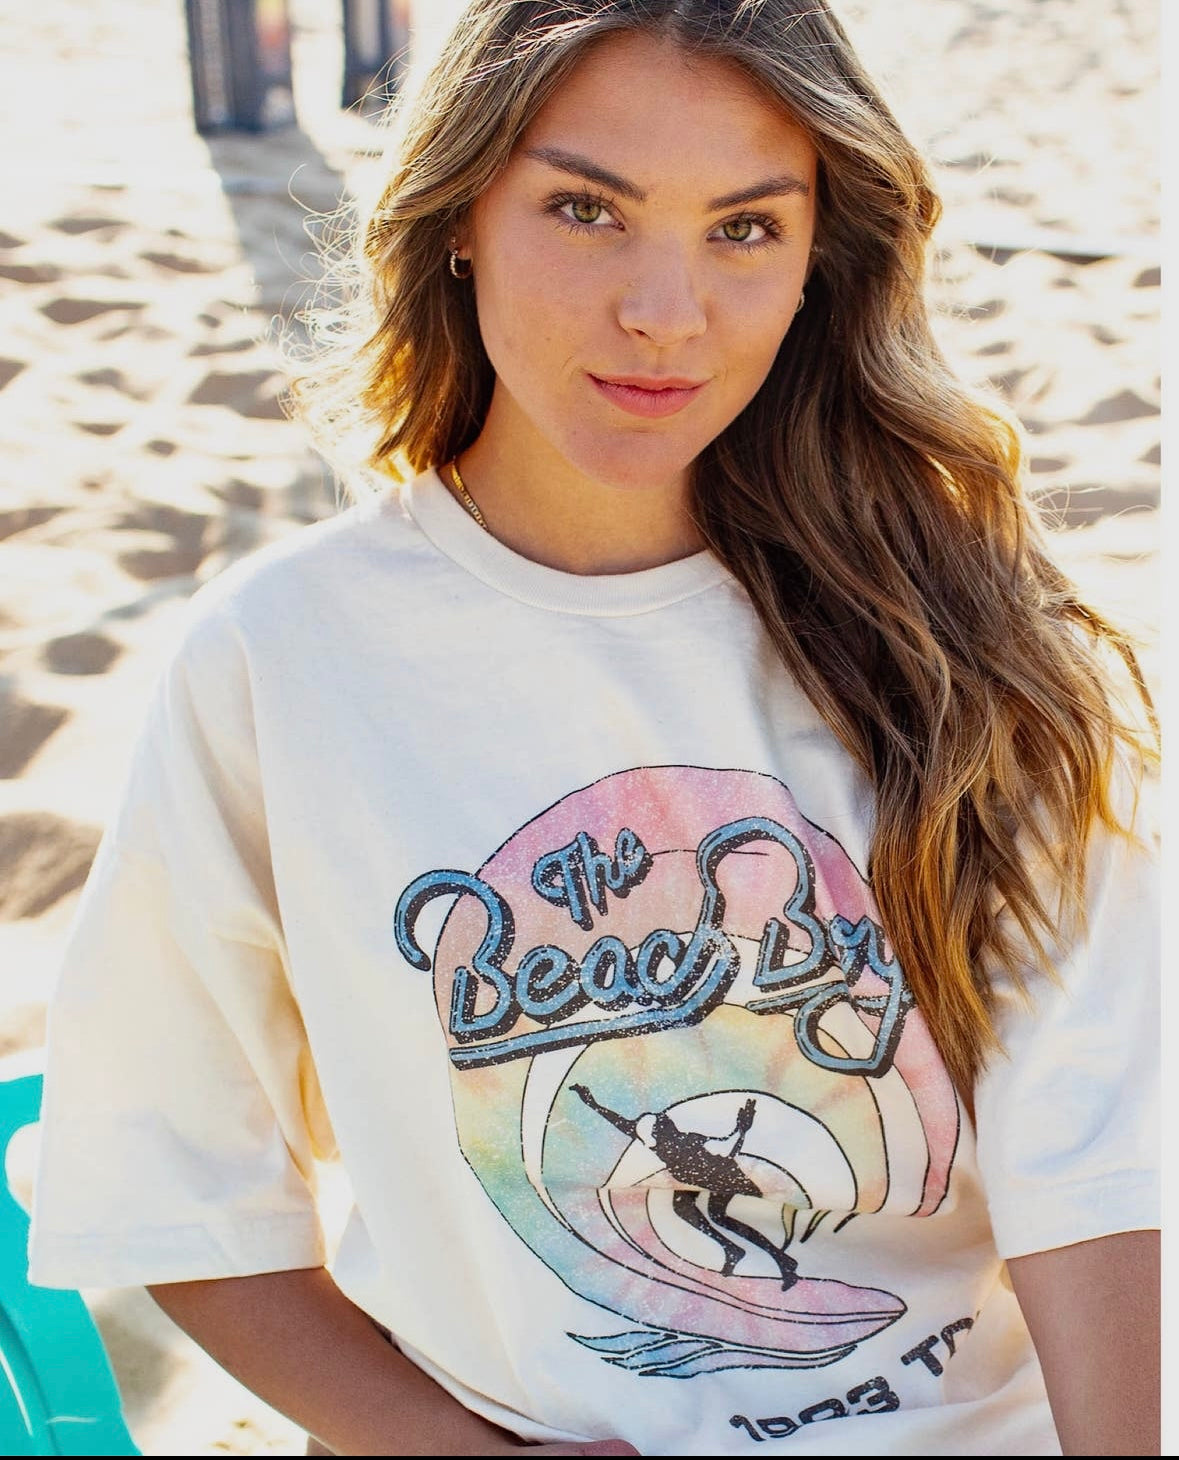 The beach boys oversized graphic t